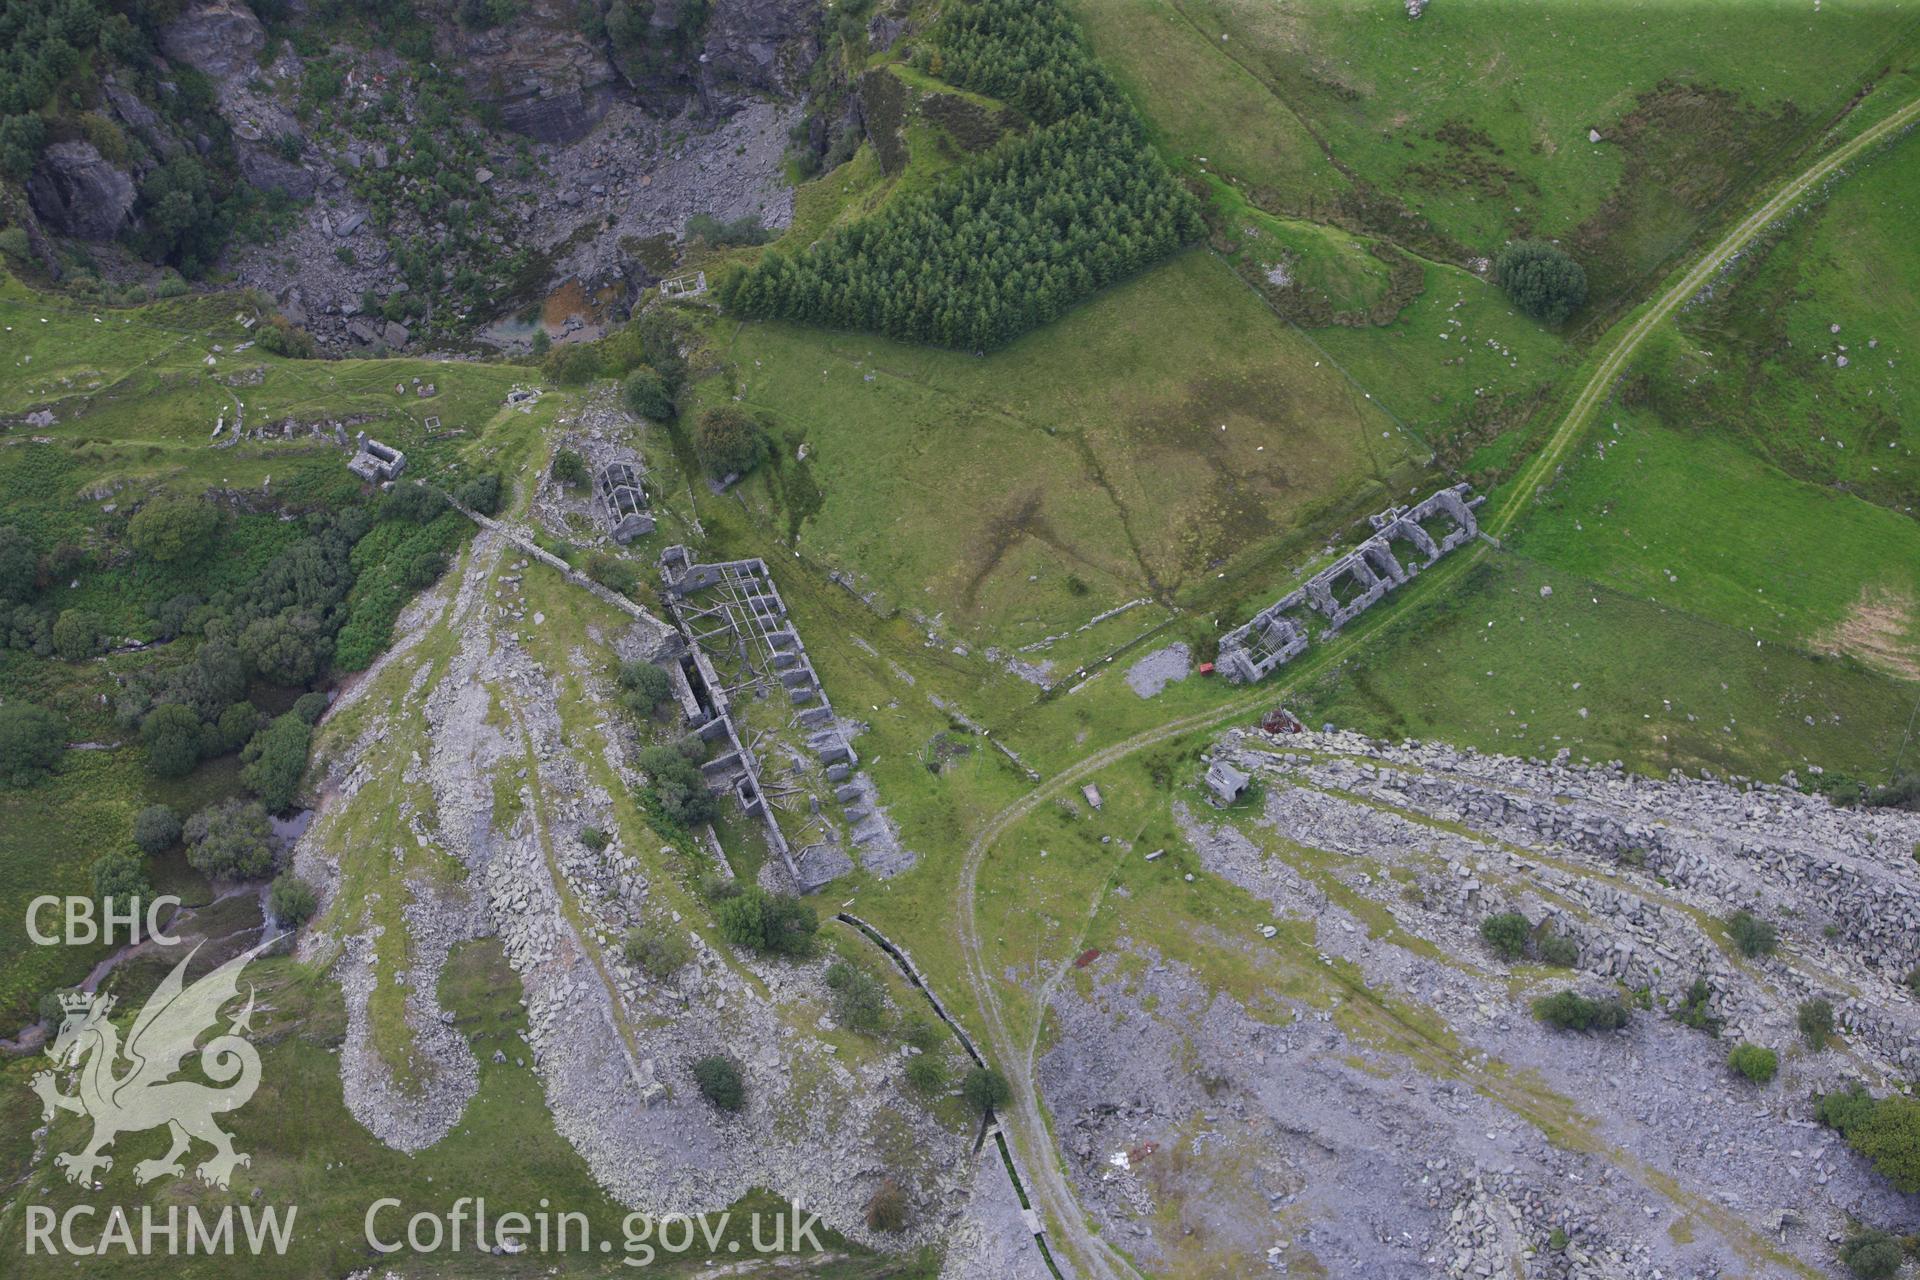 RCAHMW colour oblique aerial photograph of Rhos Quarry (Slate and Slab Works), Capel Curig. Taken on 06 August 2009 by Toby Driver